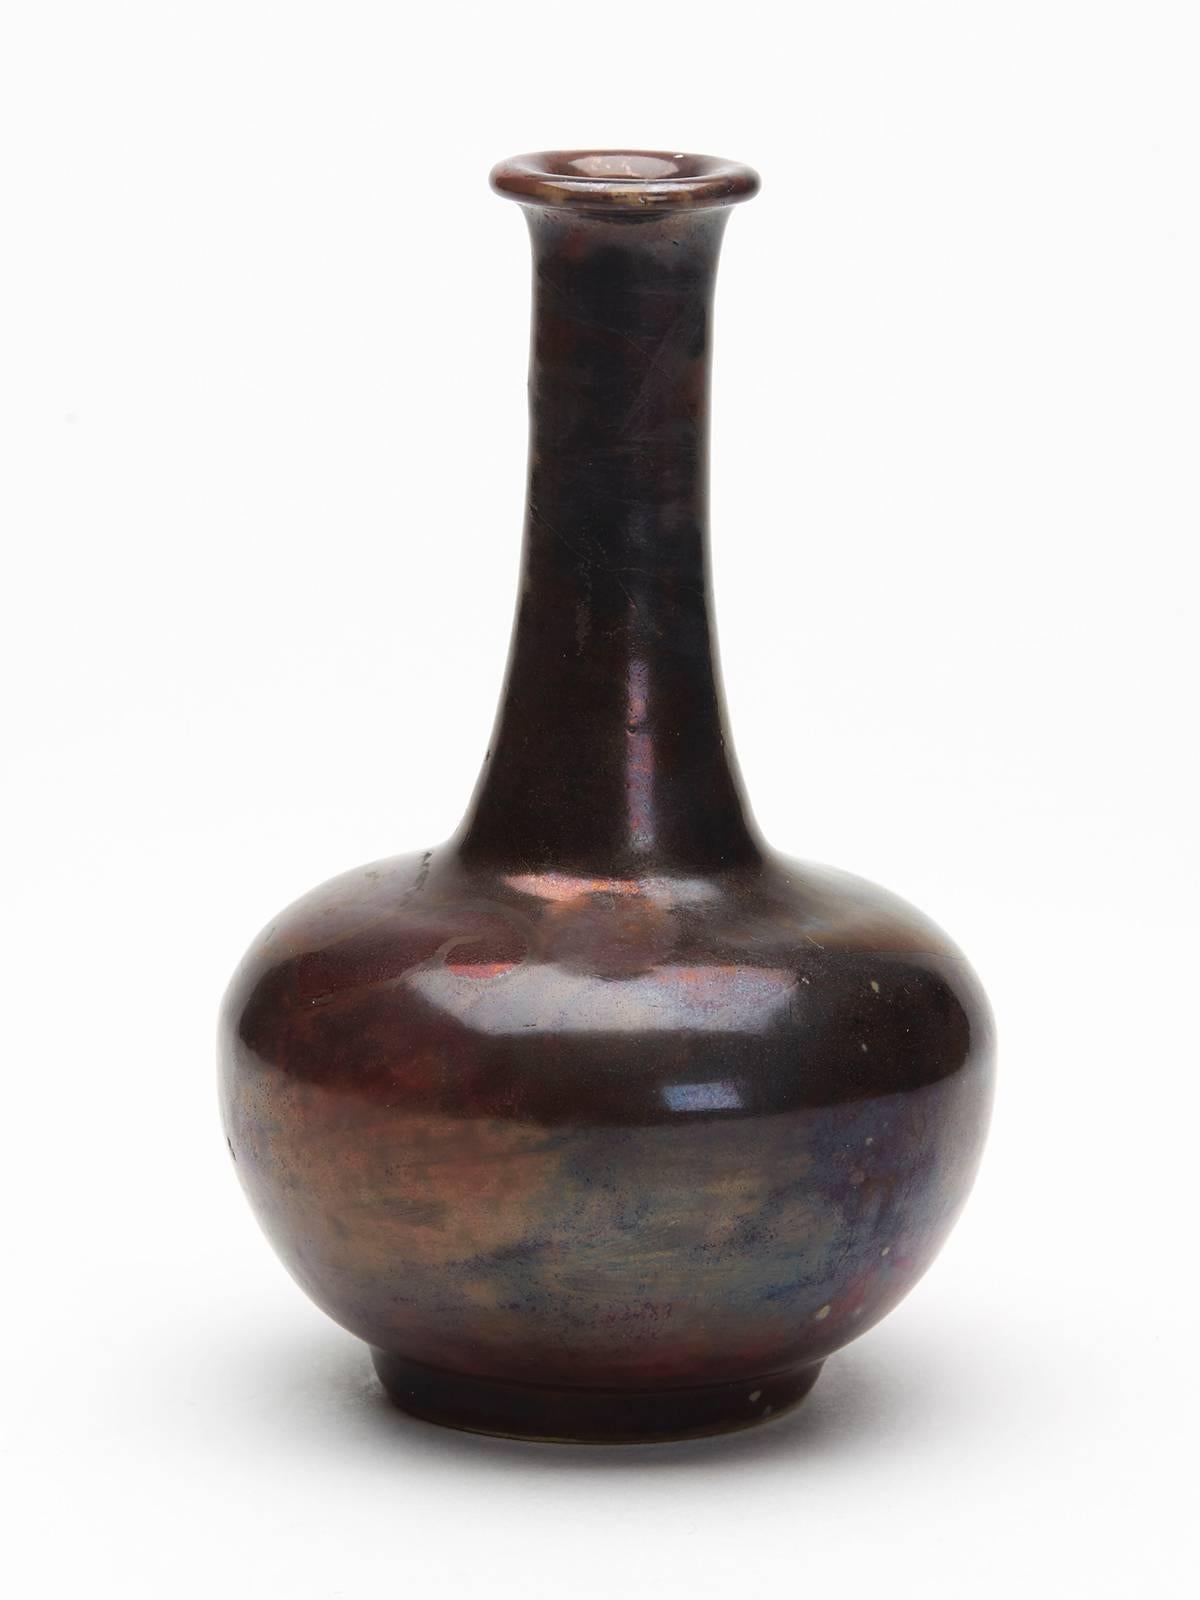 A stylish Arts & Crafts Bernard Moore high-fired luster solifleur vase with a rounded body on a narrow rounded foot with narrow neck and everted rim. The vase is covered in smoked black luster and copper glazes over a flambe red ground with a